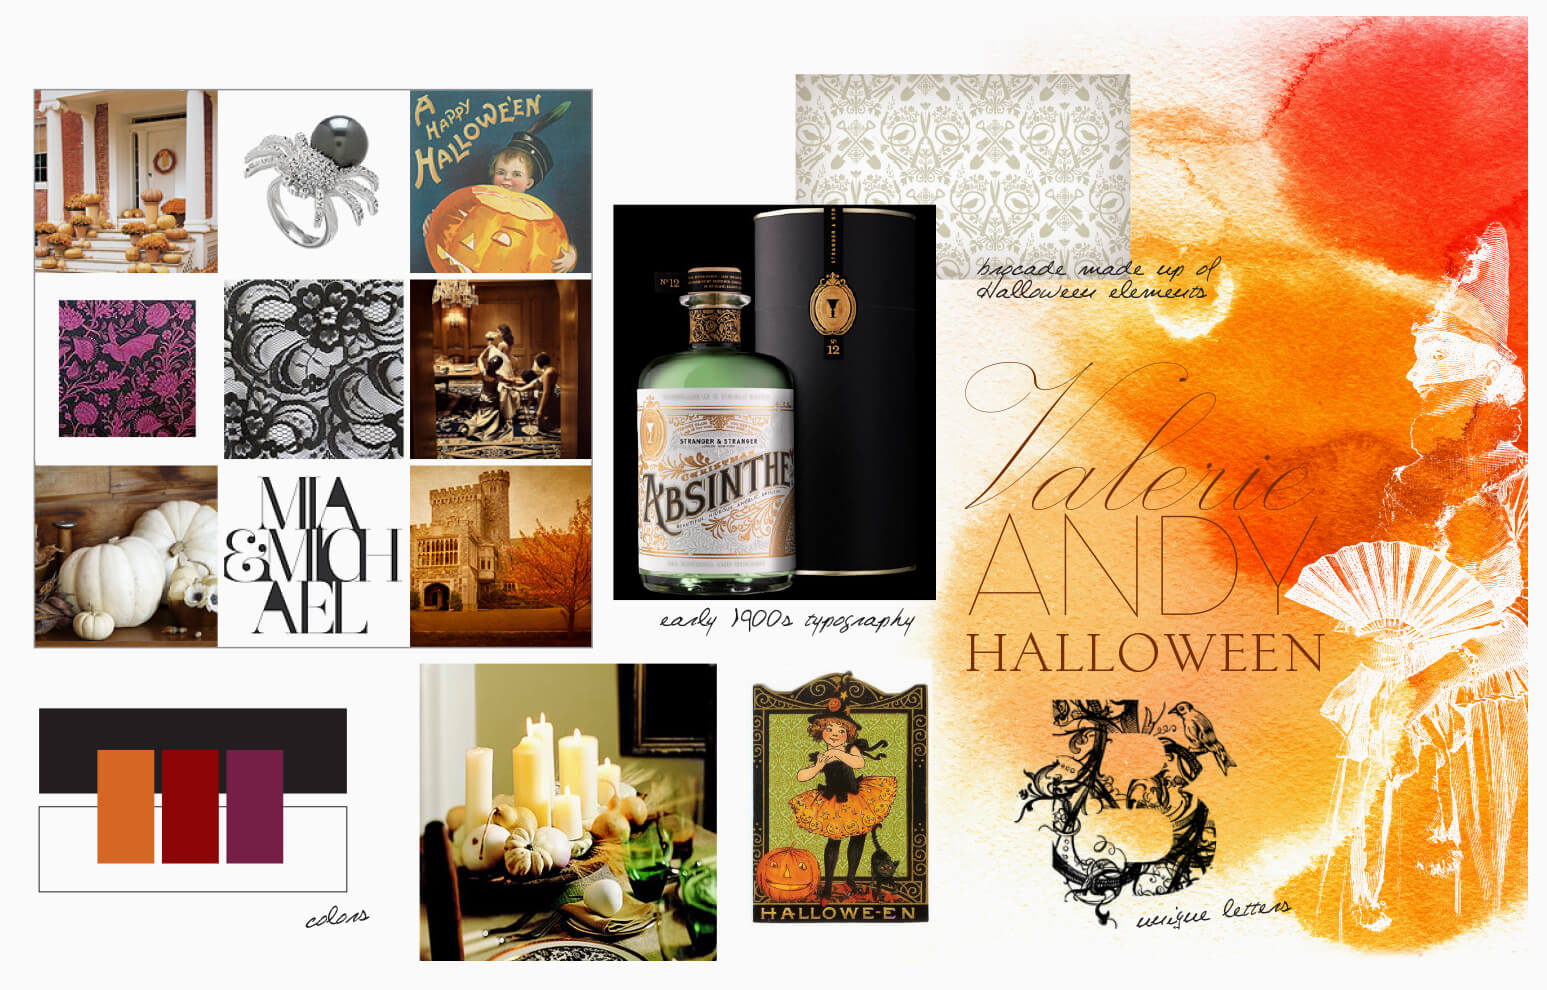 Absinthe packaging and spooky inspiration